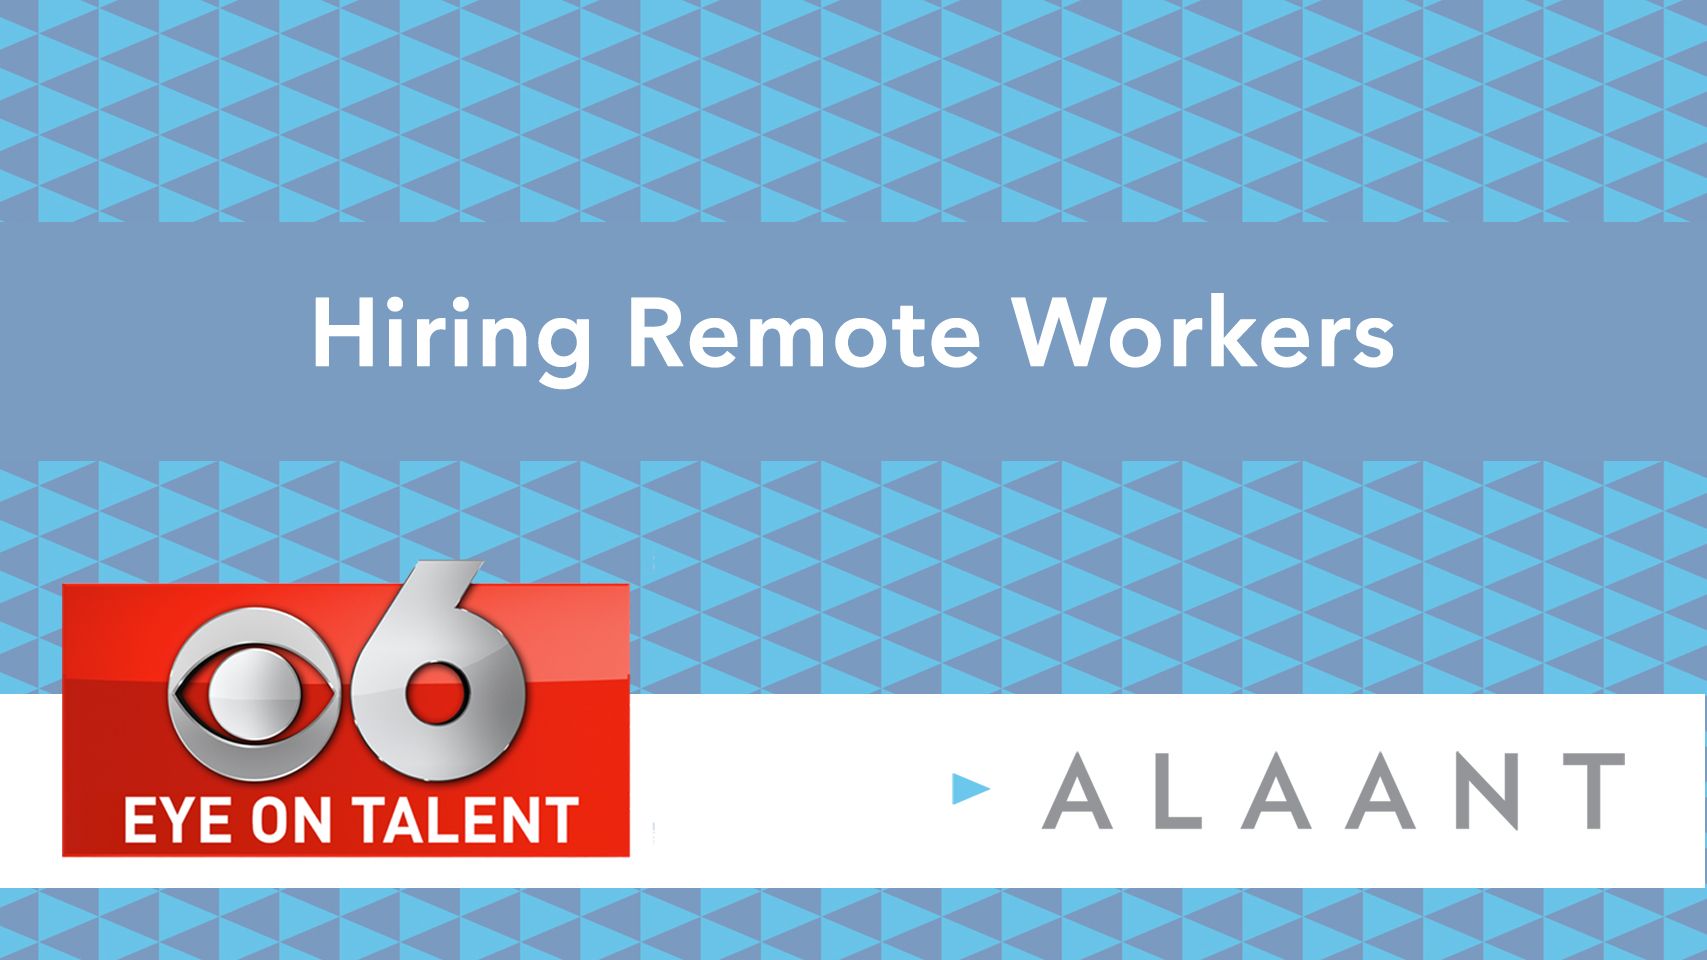 Alaant Eye on Talent Hiring Remote Workers